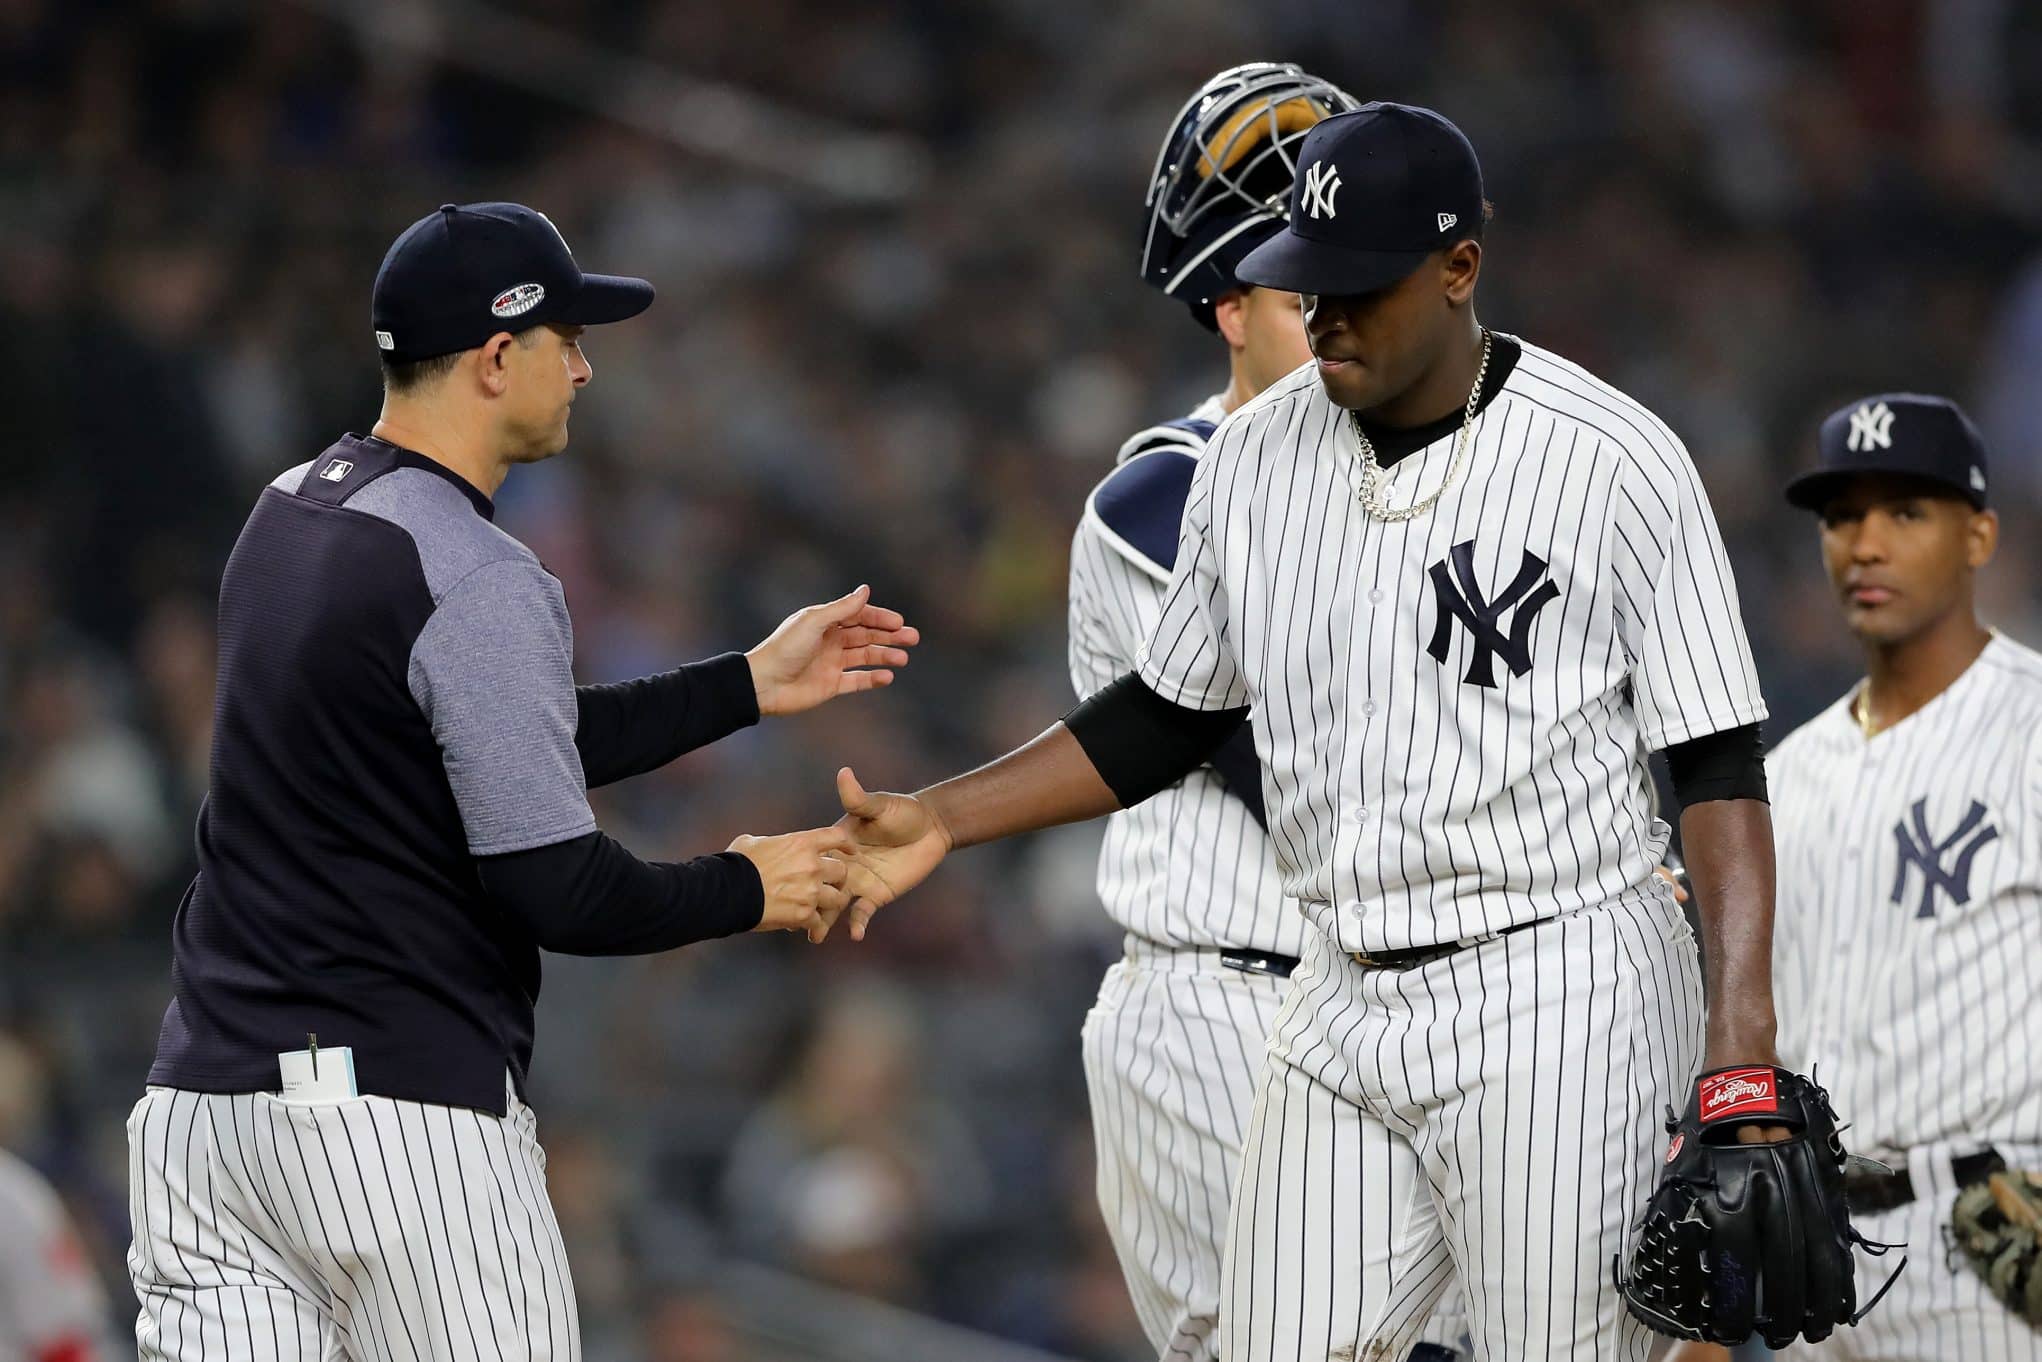 Key storylines as Yankees face elimination in Game 4